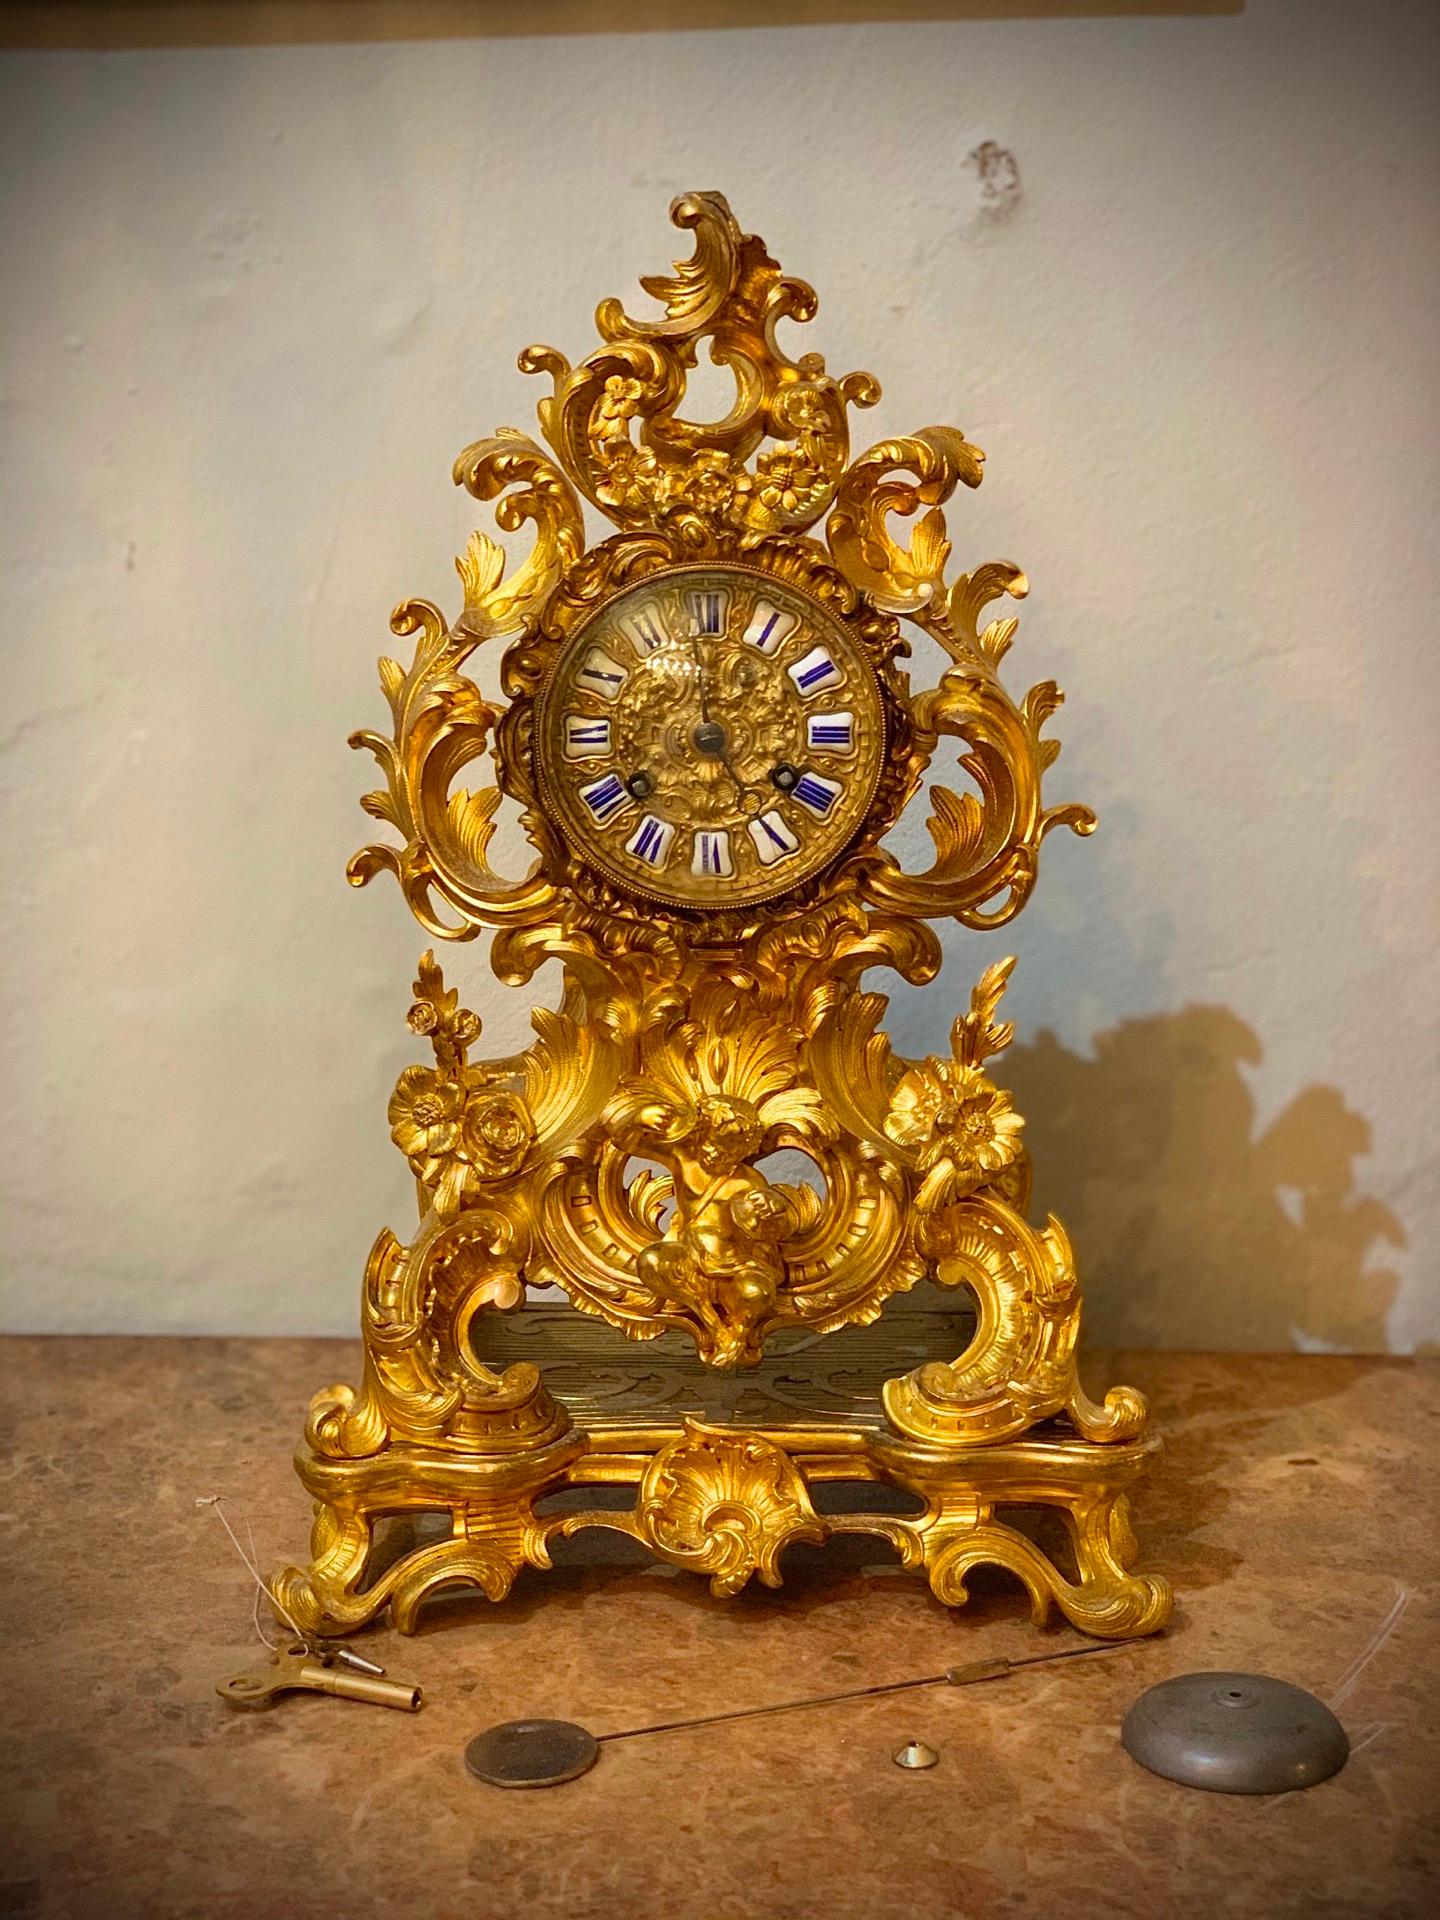 Elegant gilt bronze table pendulum clock with wire pendulum suspension. Made in Paris at the beginning of the 19th century by Frèdèric Japy, who was awarded the Gold Medal for the innovative mechanism of his watches.
Working weekly winding, it